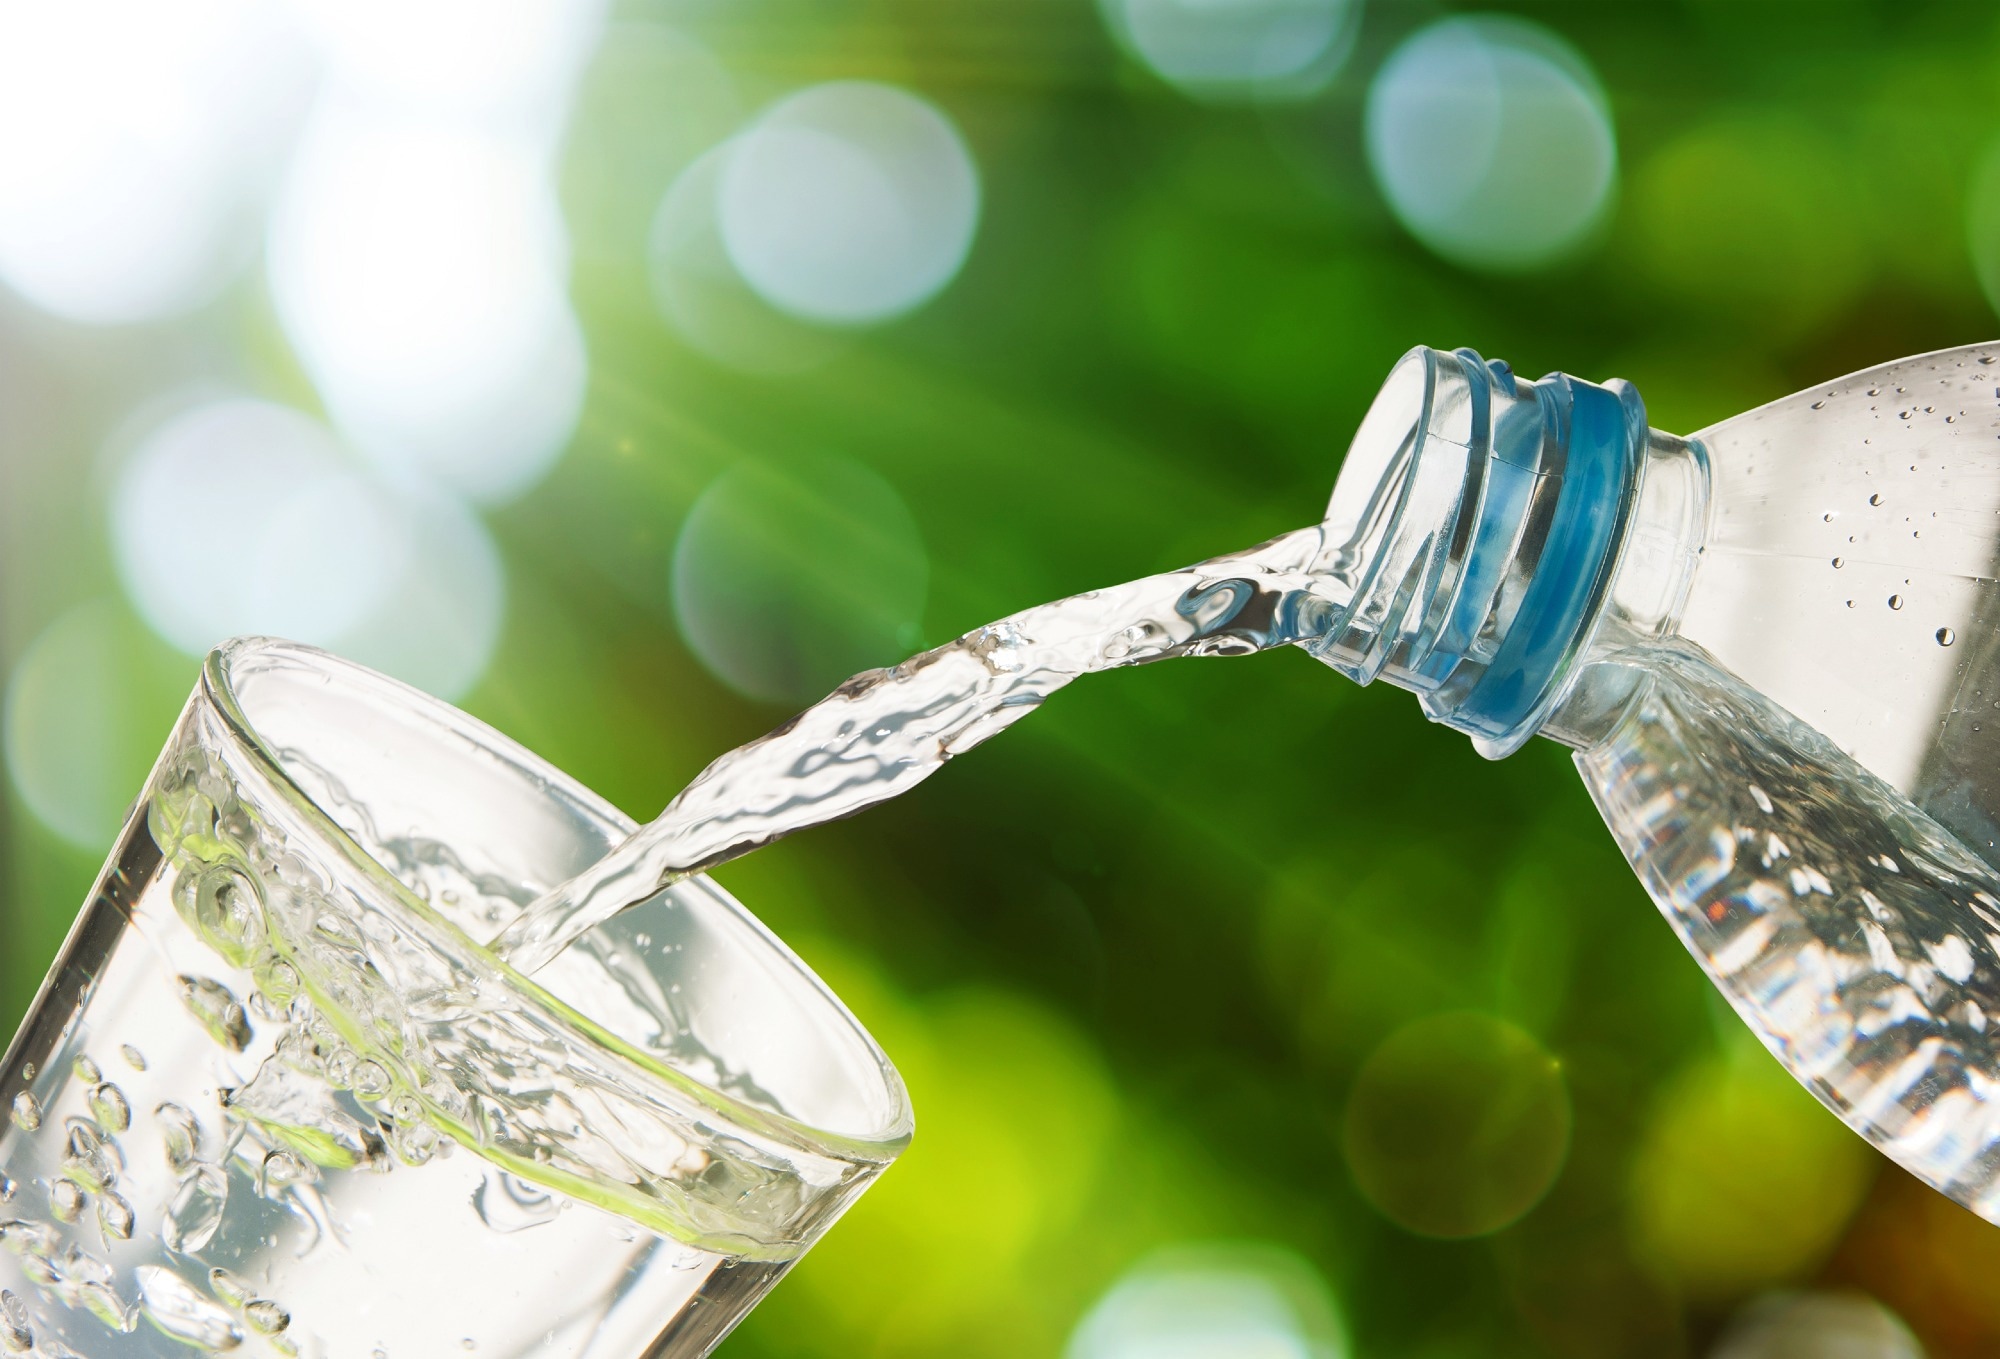 Review: Long-term health outcomes associated with hydration status. Image Credit: Love the wind / Shutterstock